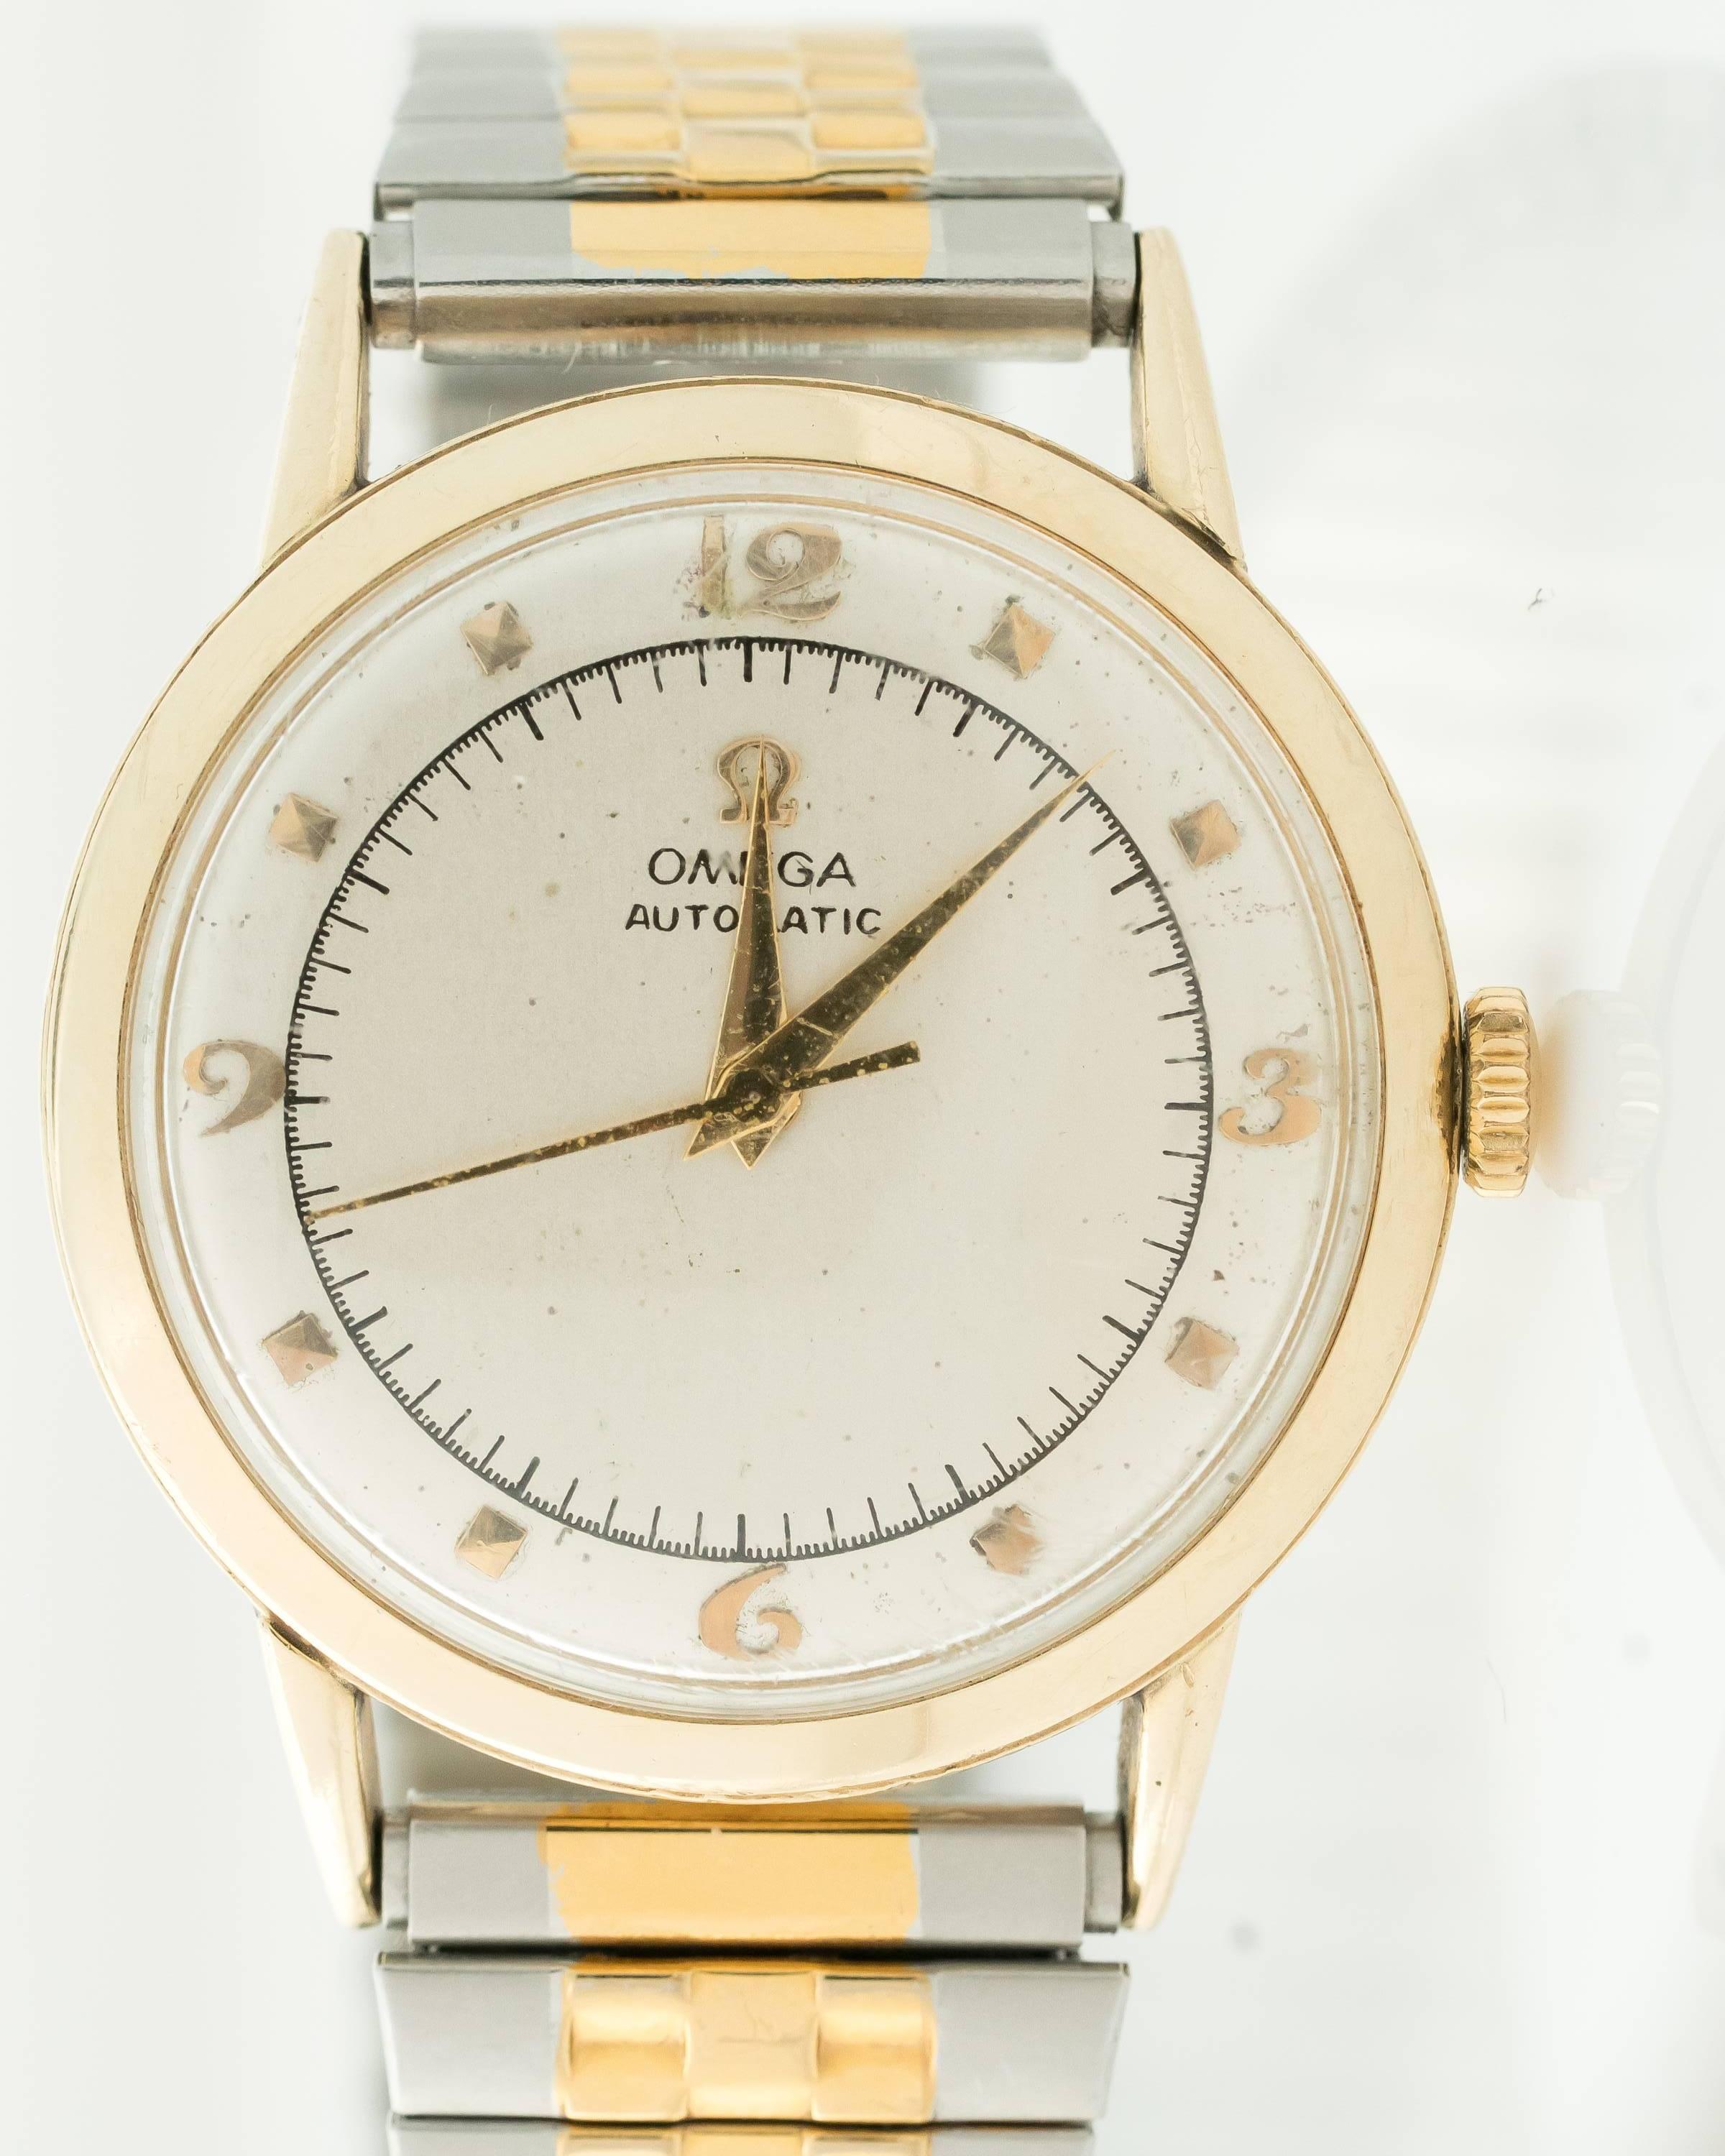 Omega wows with this 1950s classically designed 14 Karat Yellow Gold Unisex wrist watch. The round case has a smooth gold bezel and back. The satiny smooth silvered dial features gold Arabic and stick numbers, gold Alpha hour and minute hands and a